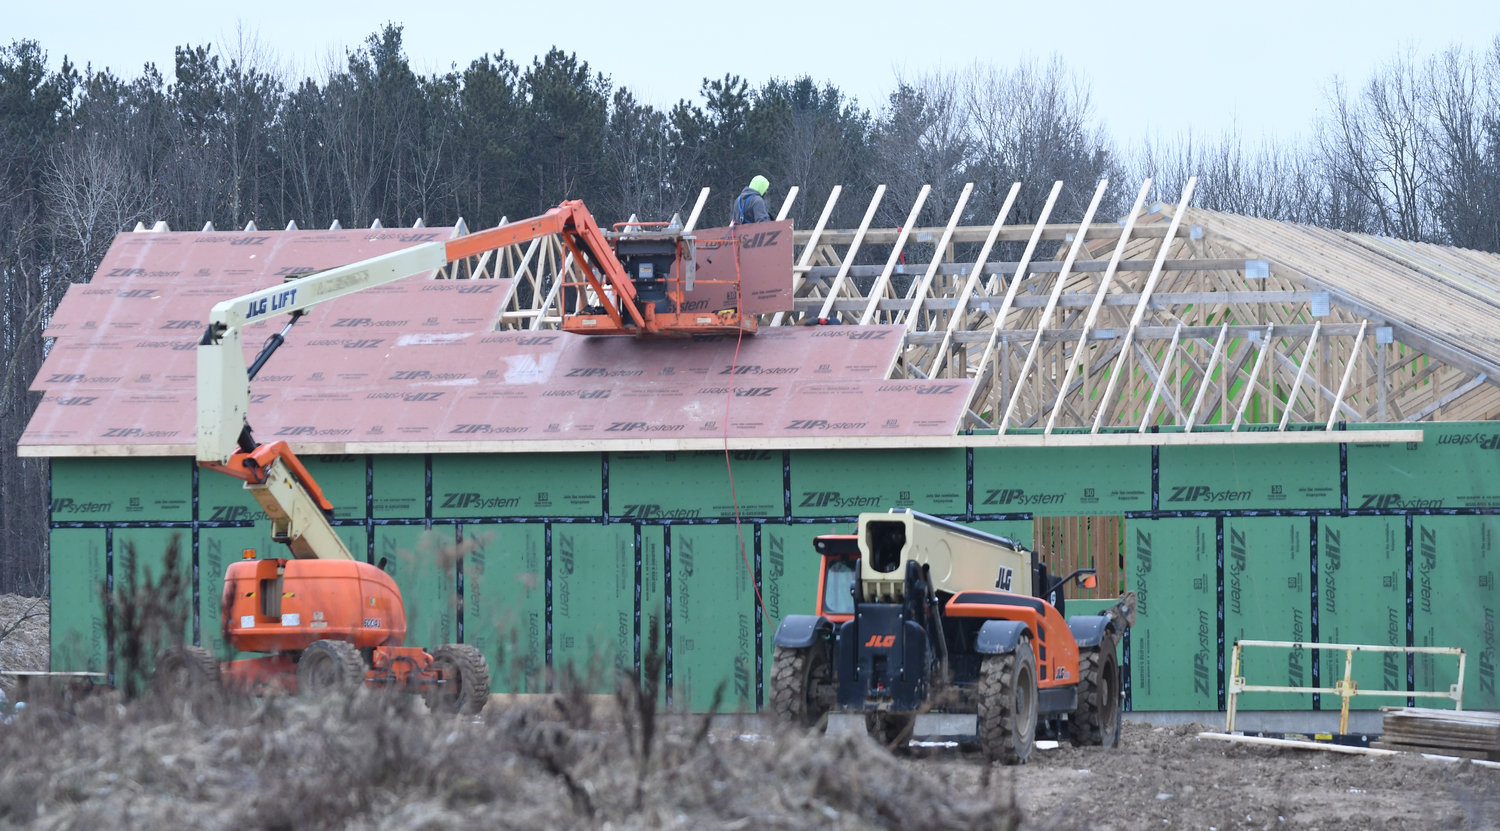 Despite a wintry mix of rain, freezing rain and snow, roof work at the housing complex under construction on Merrick Road in Rome continues on Tuesday, Jan. 17. The first phase of the 65-home project, which includes the construction of 50 units, is already well under way.